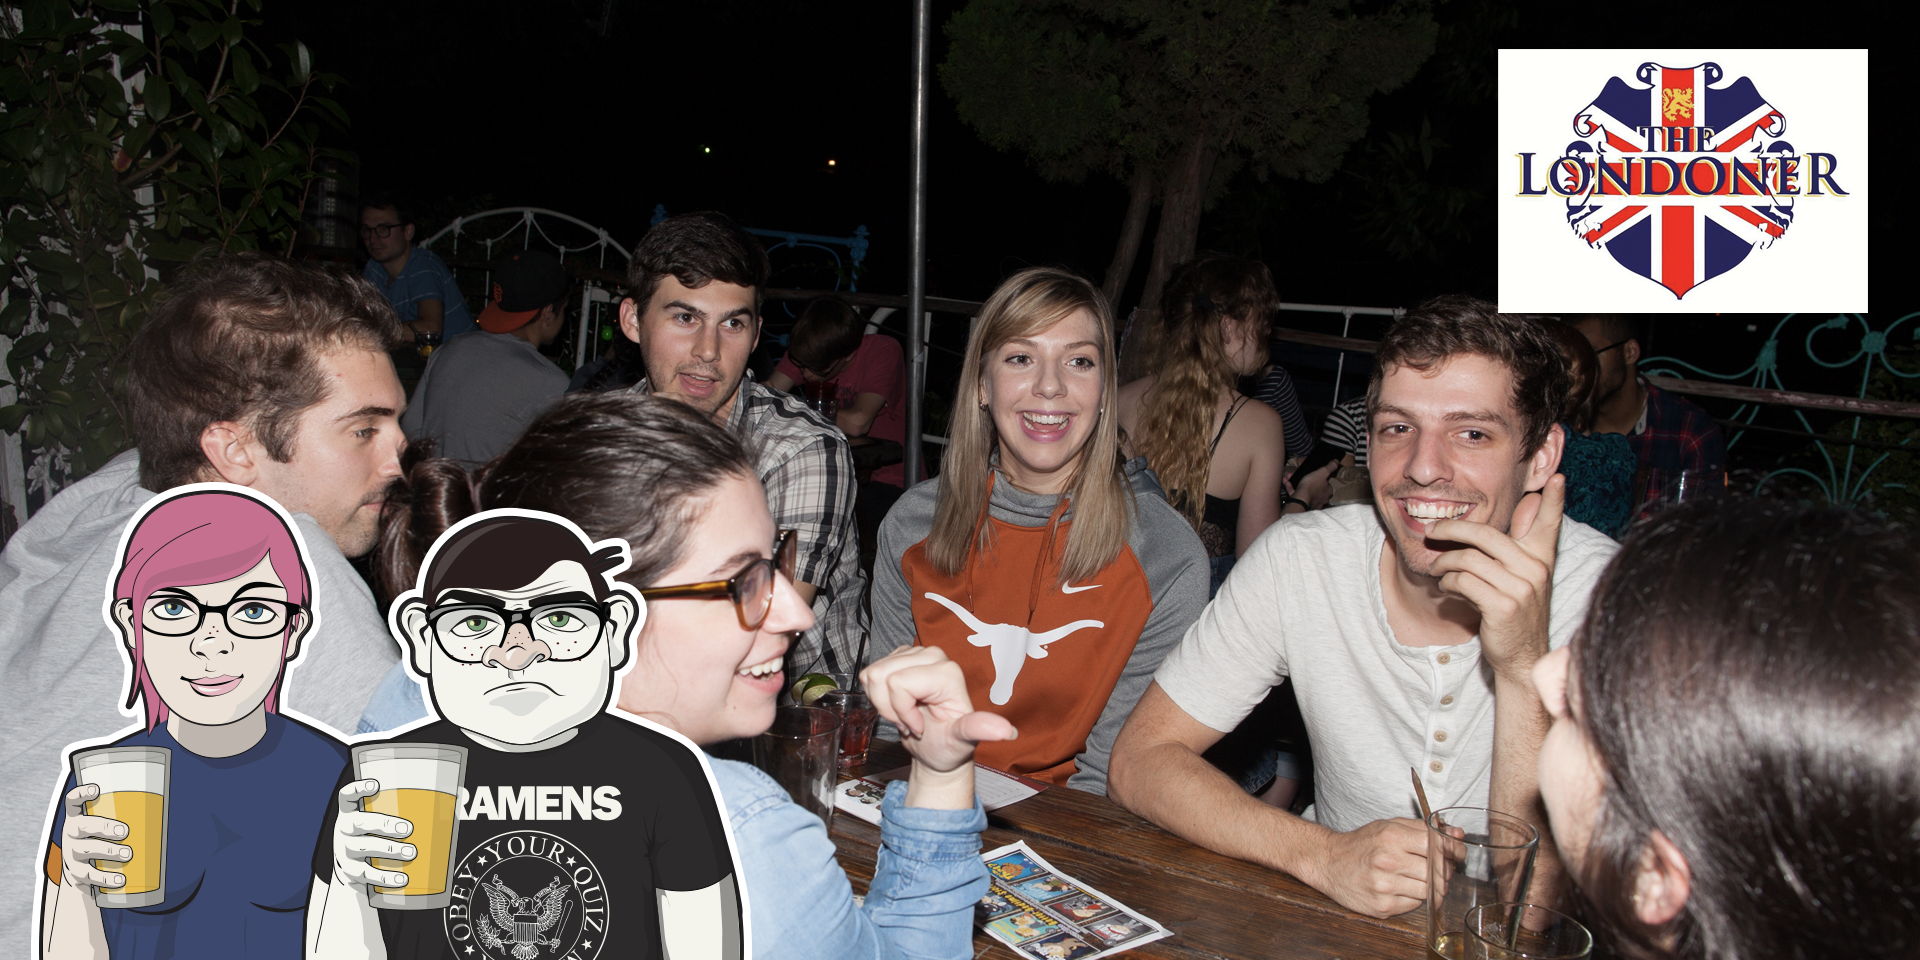 Geeks Who Drink Trivia Night at The Londoner (Addison) promotional image